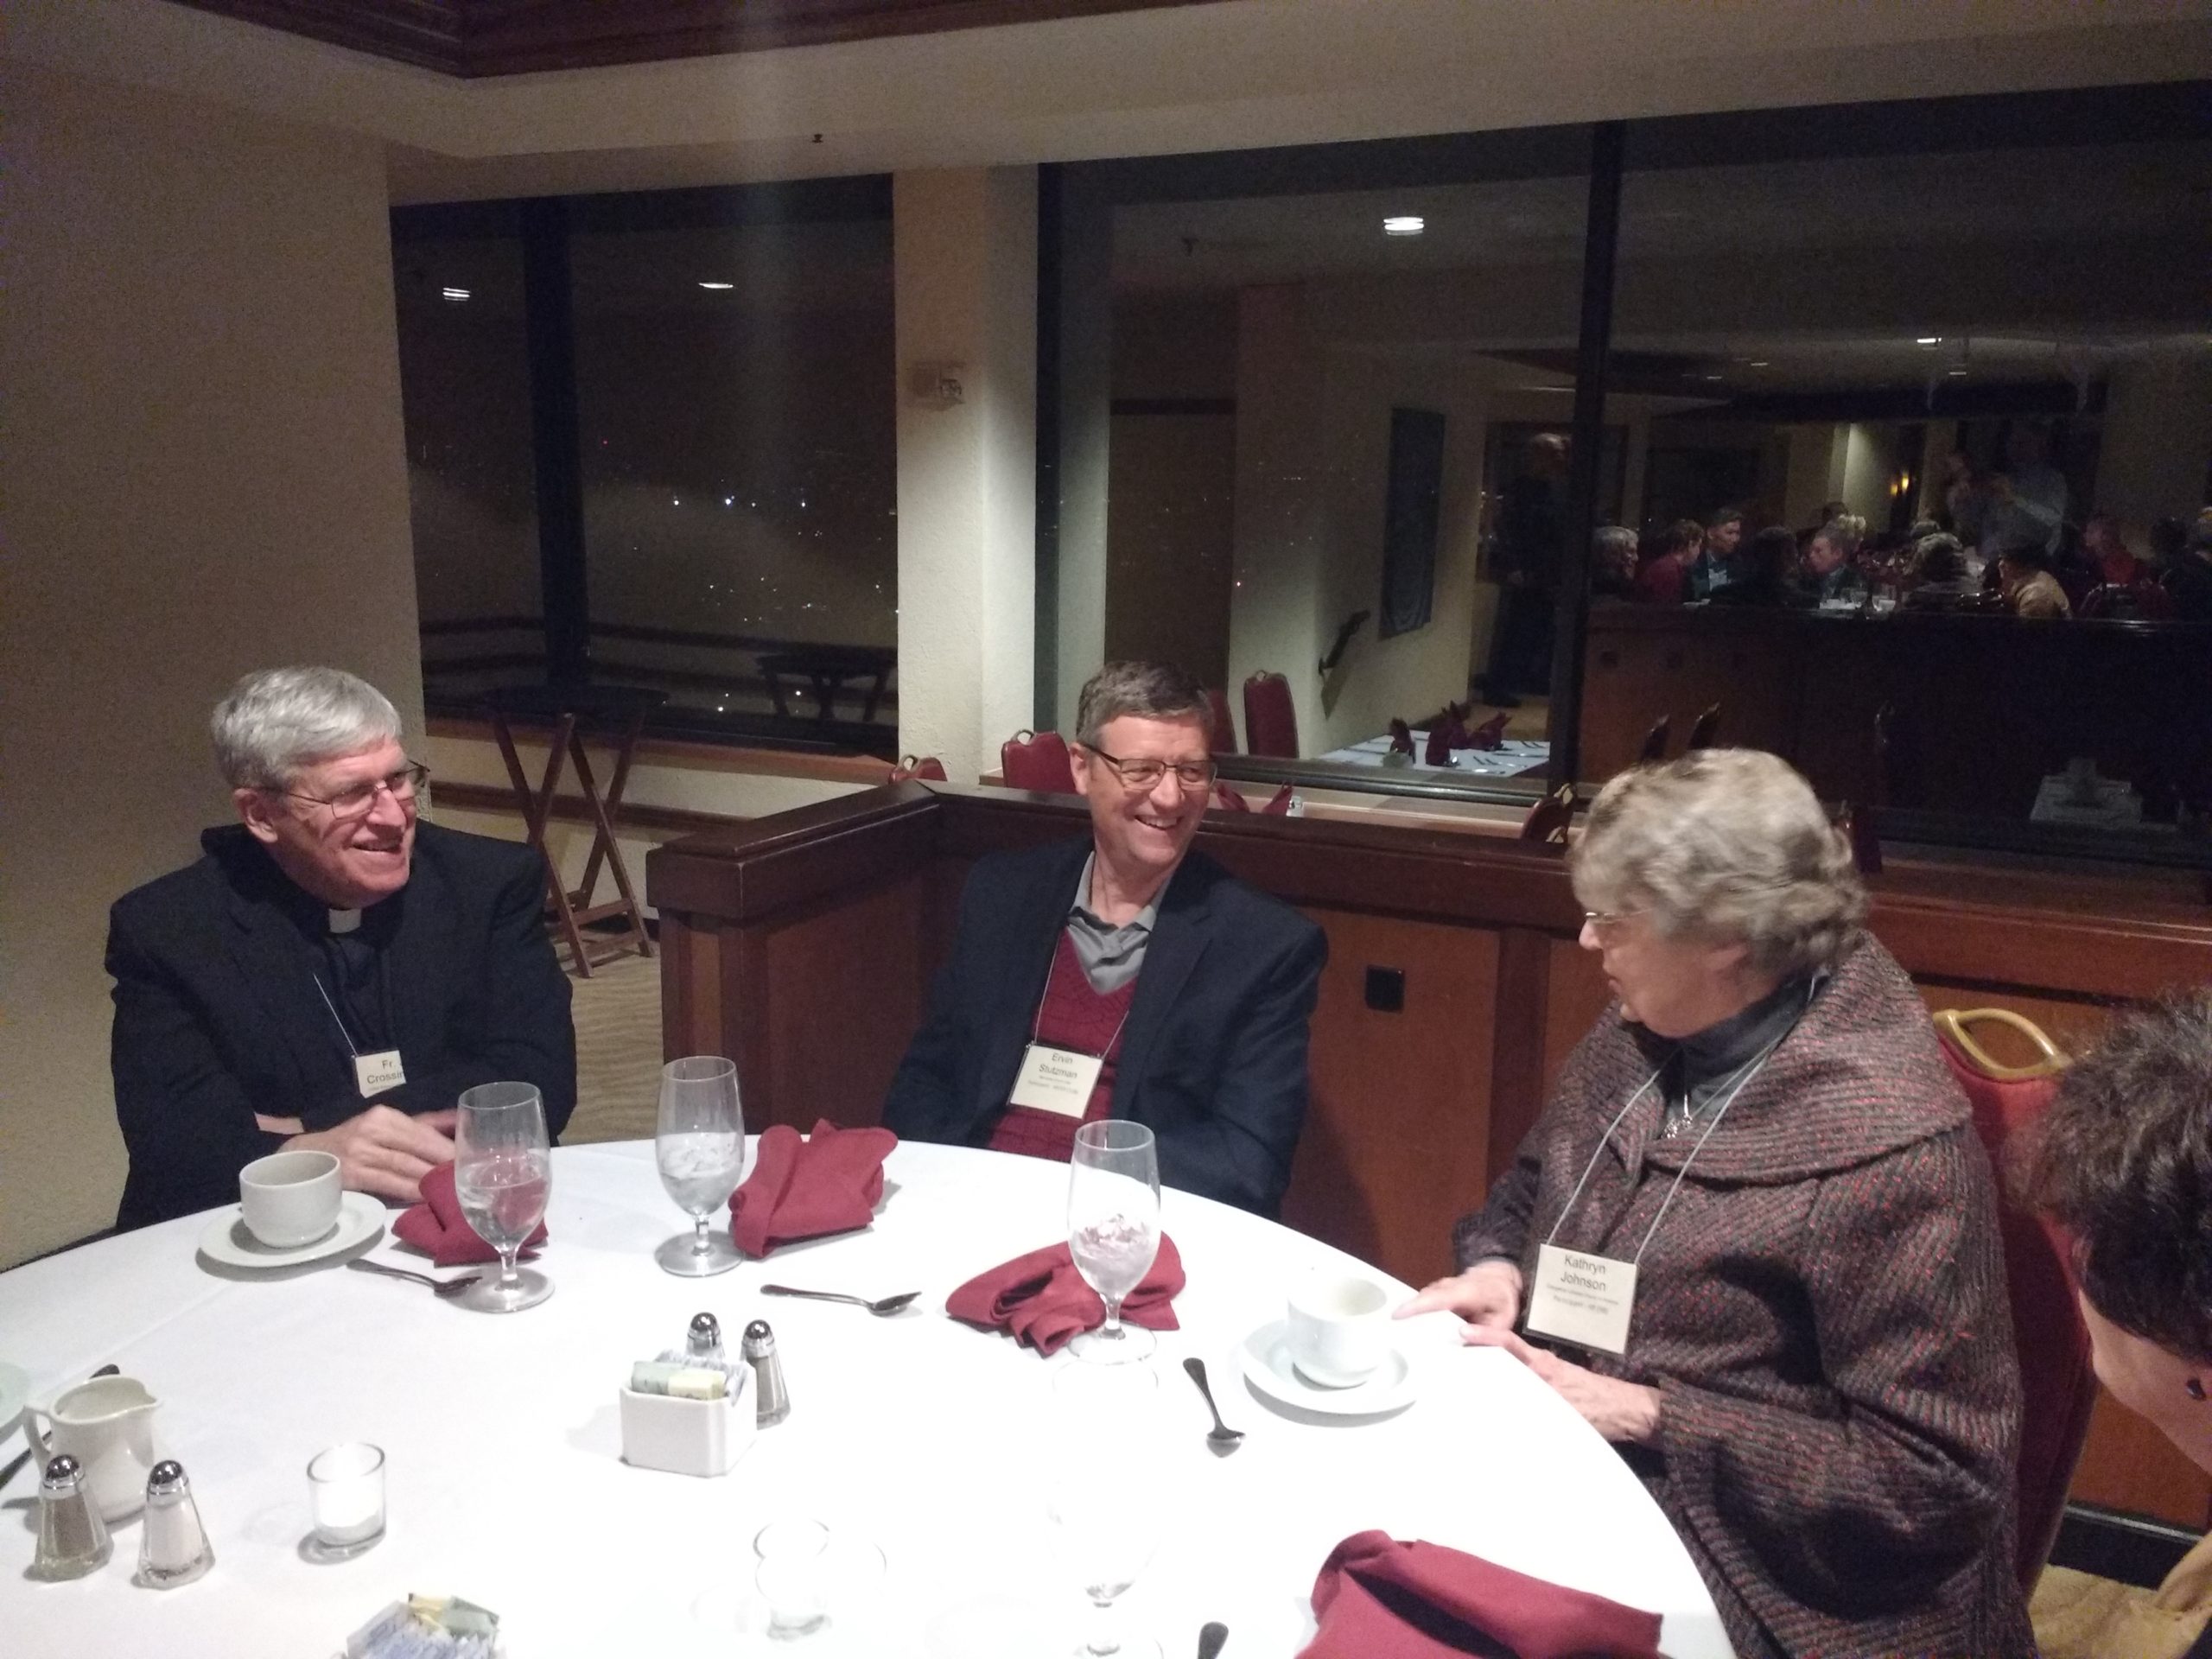 Ervin Stutzman in a dinner conversation at the annual convocation of Christian Churches Together with Fr. John Crossin pf the U.S. Conference of Catholic Bishops and Kathryn Johnson of the Evangelical Lutheran Church in America, who give leadership to ecumenical relations for their churches.